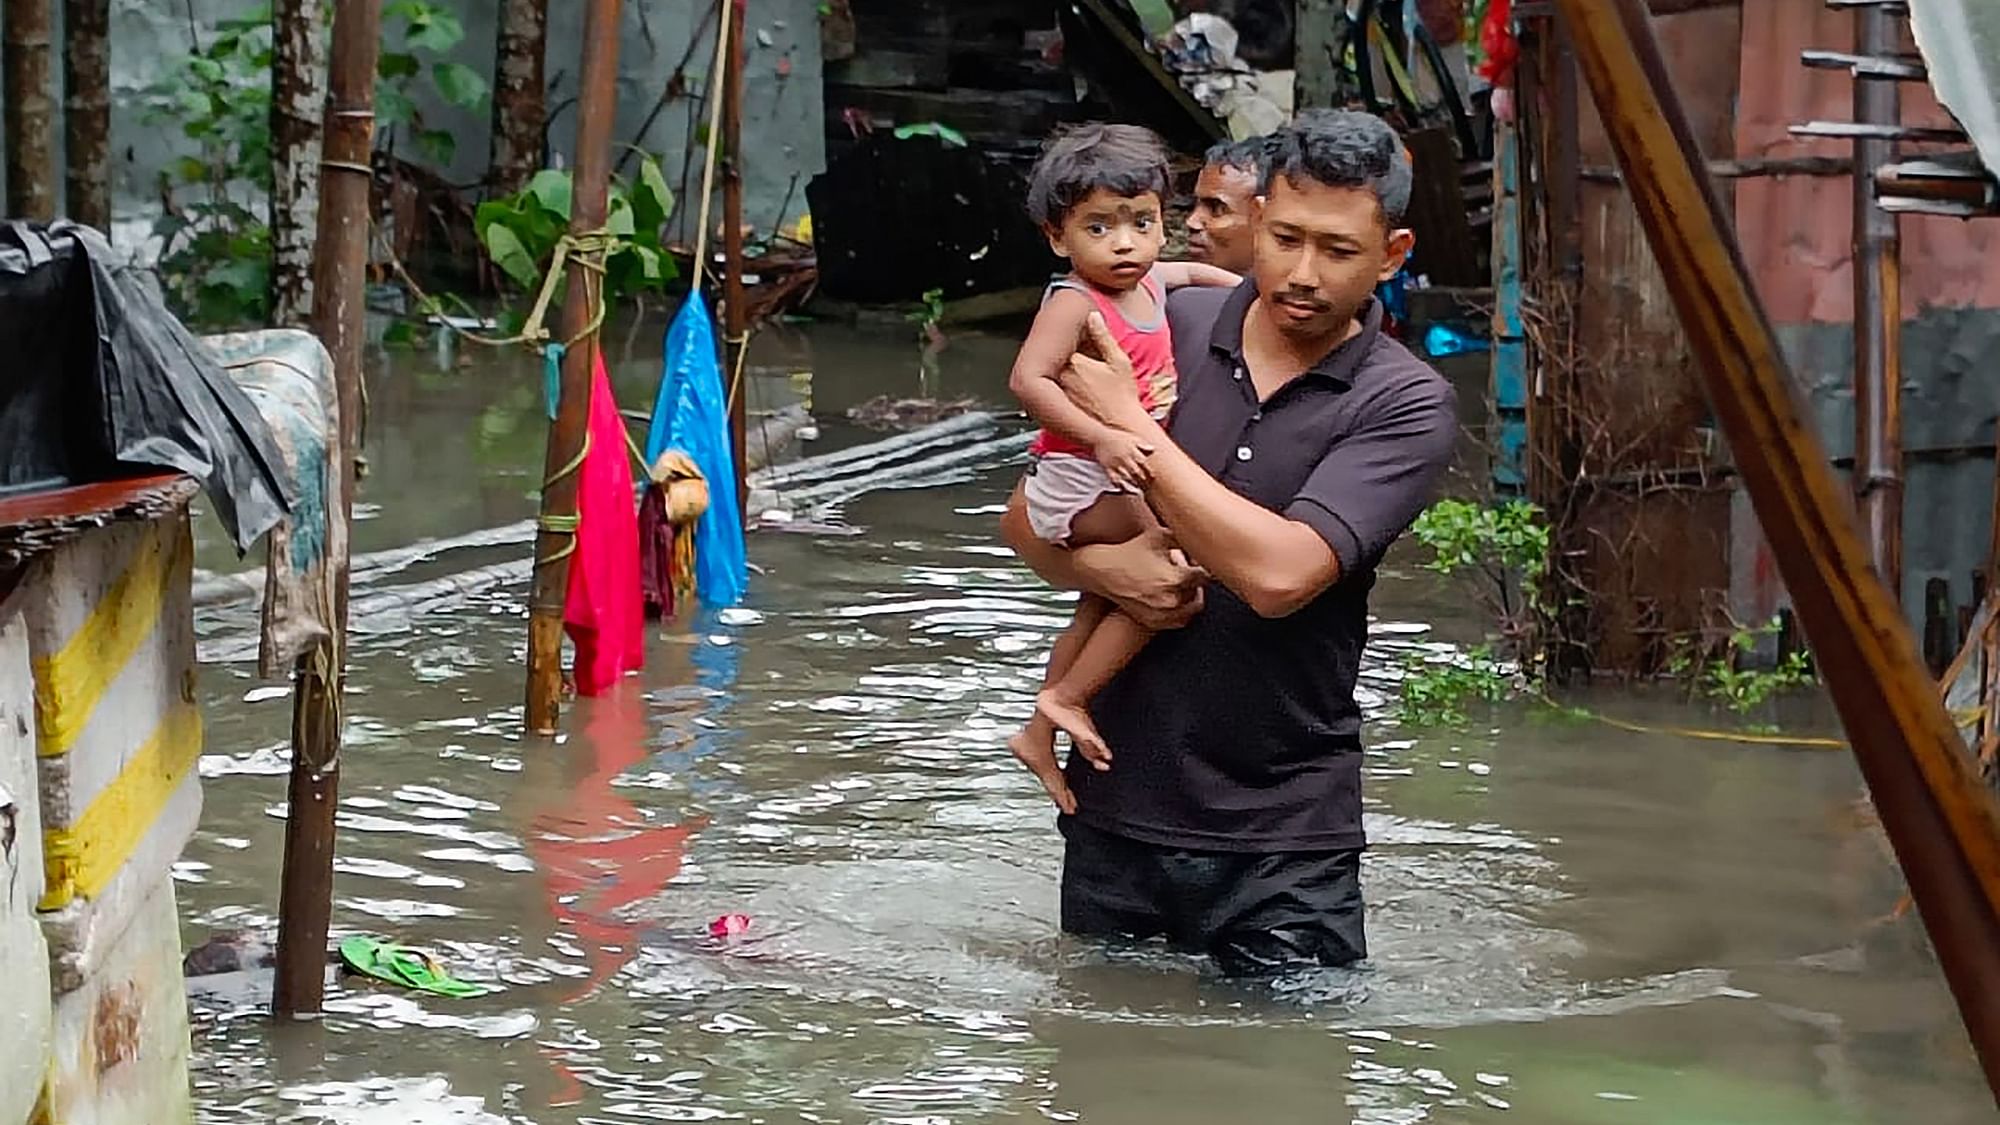 <div class="paragraphs"><p>At least nine people died as heavy rains lashed several parts of <a href="https://www.thequint.com/topic/assam">Assam</a> and <a href="https://www.thequint.com/topic/assam">Meghalaya</a> for a third-consecutive day on Thursday, 16 June, deteriorating the <a href="https://www.thequint.com/topic/assam">flood situation</a> in the regions.</p></div>